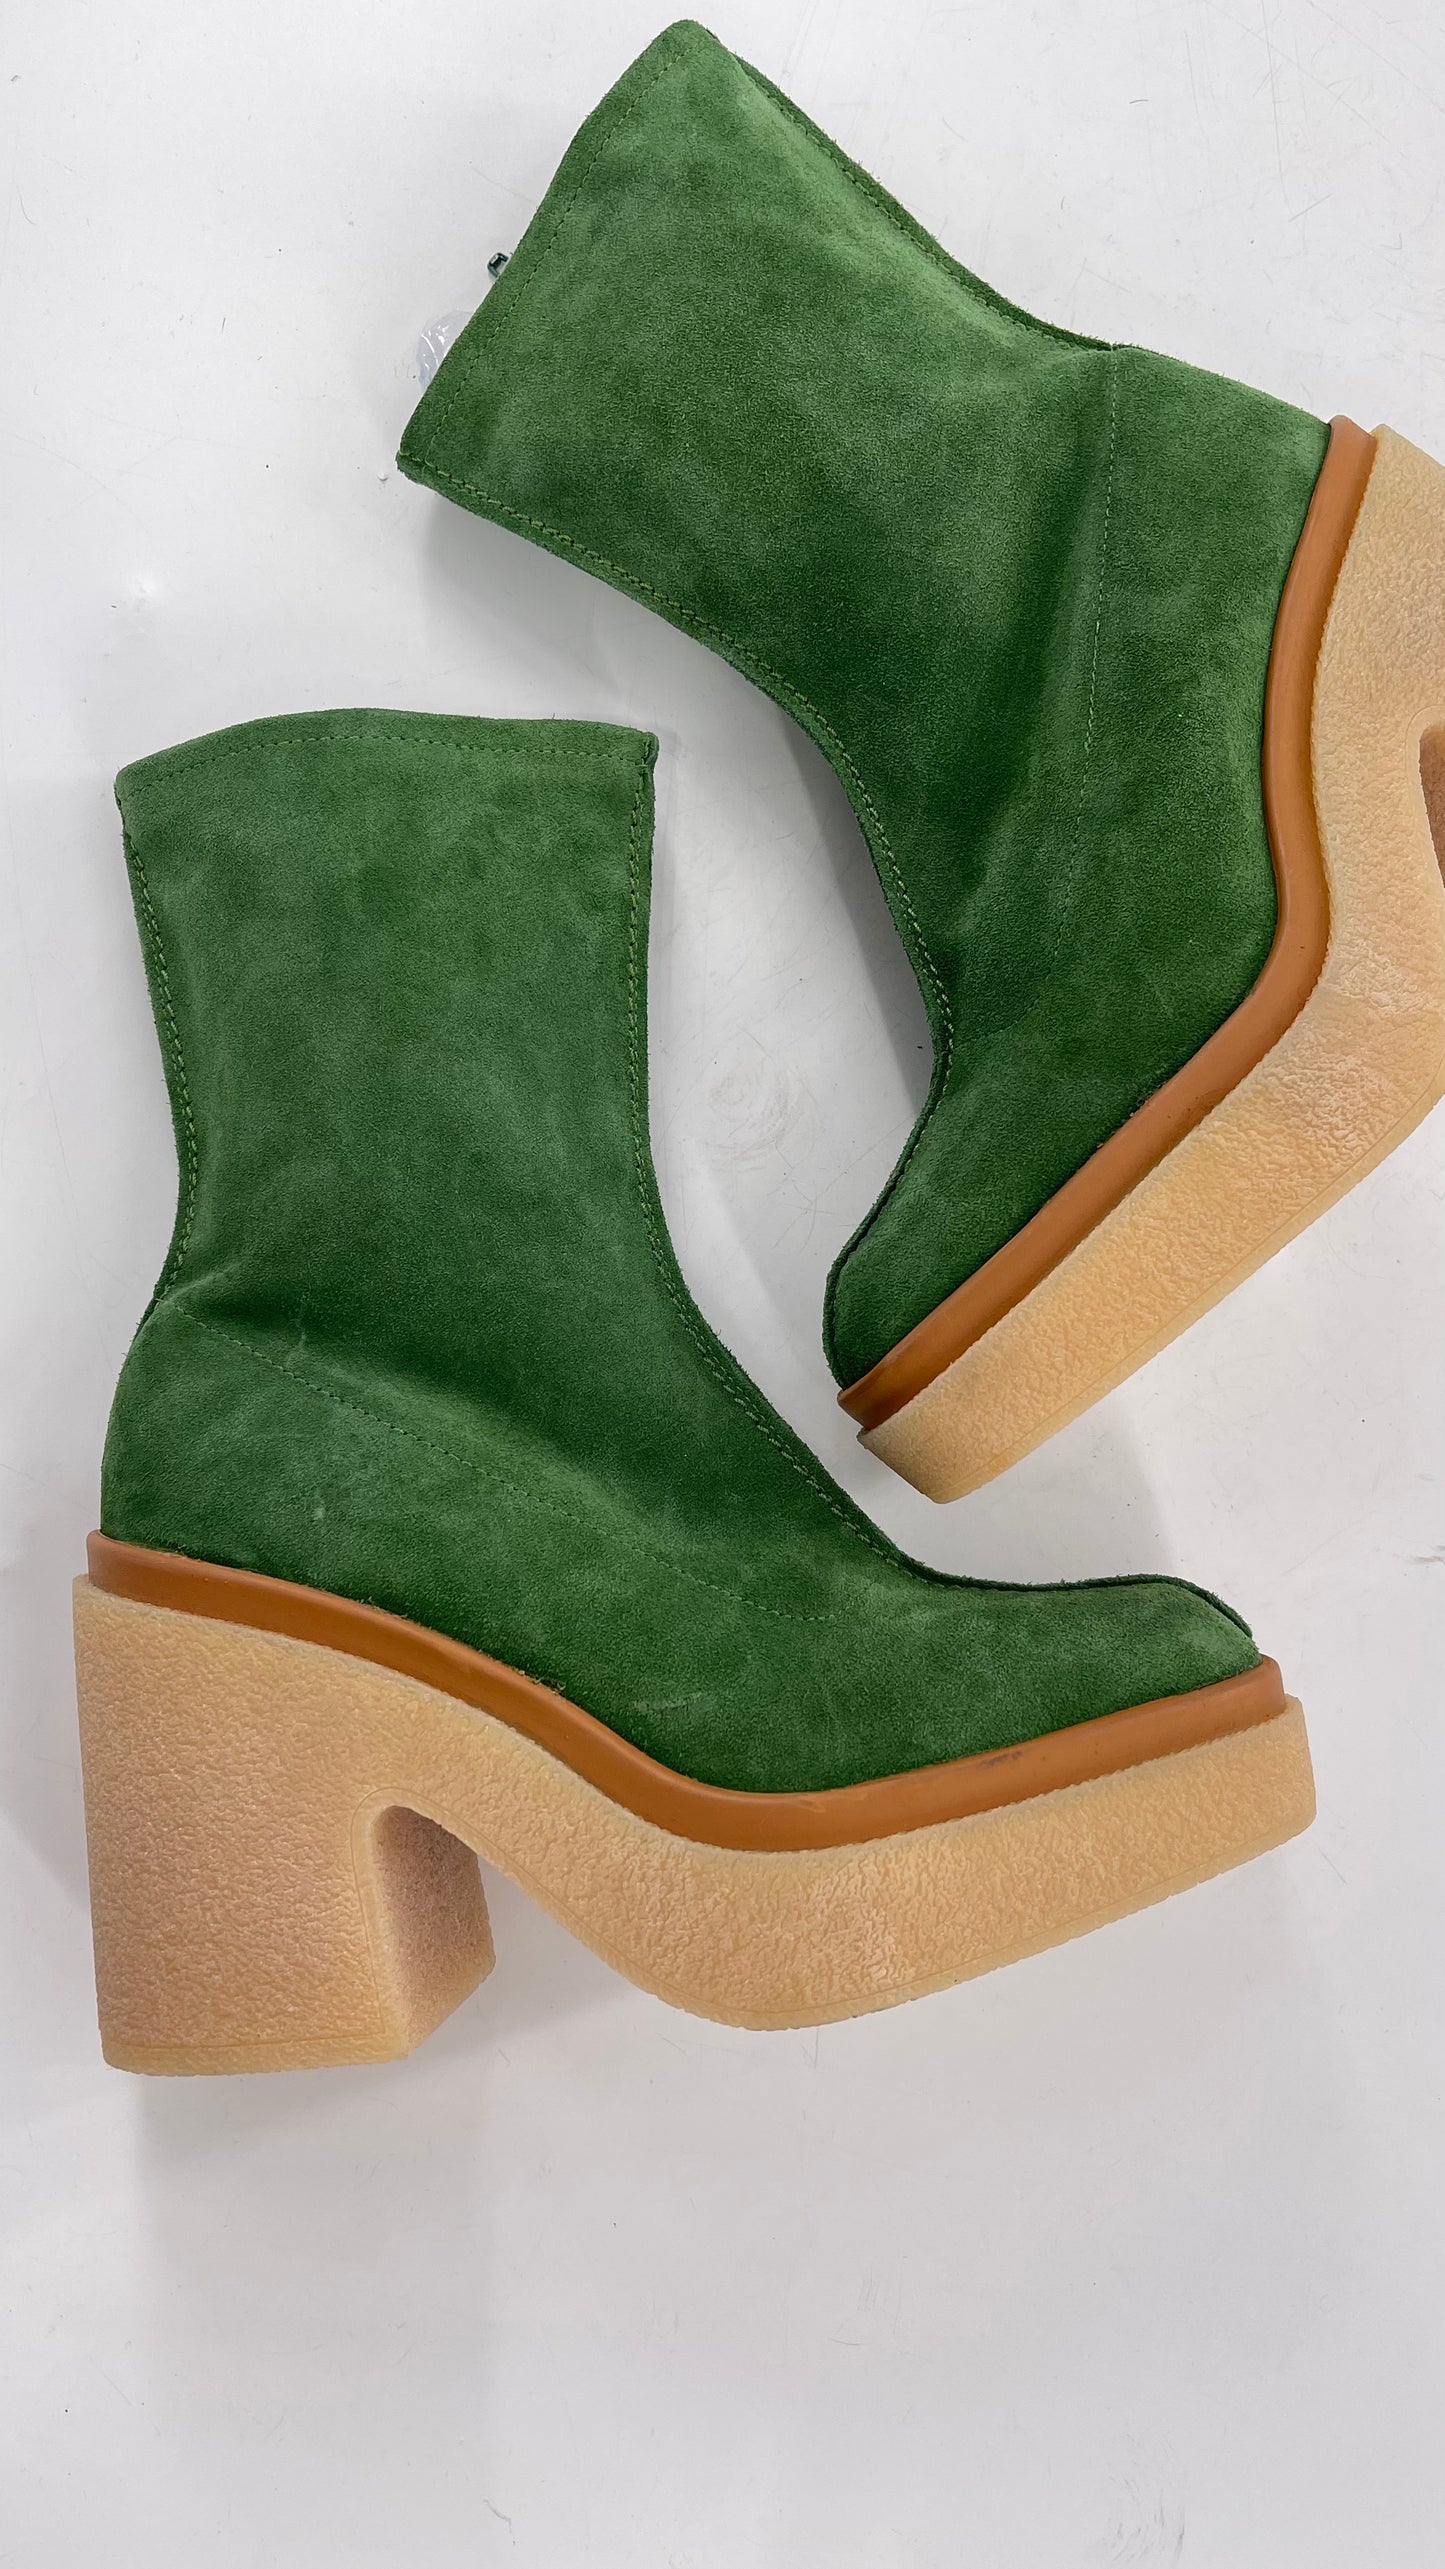 Free People Green Gigi Suede Leather Rubber Heel Boot (36.5)